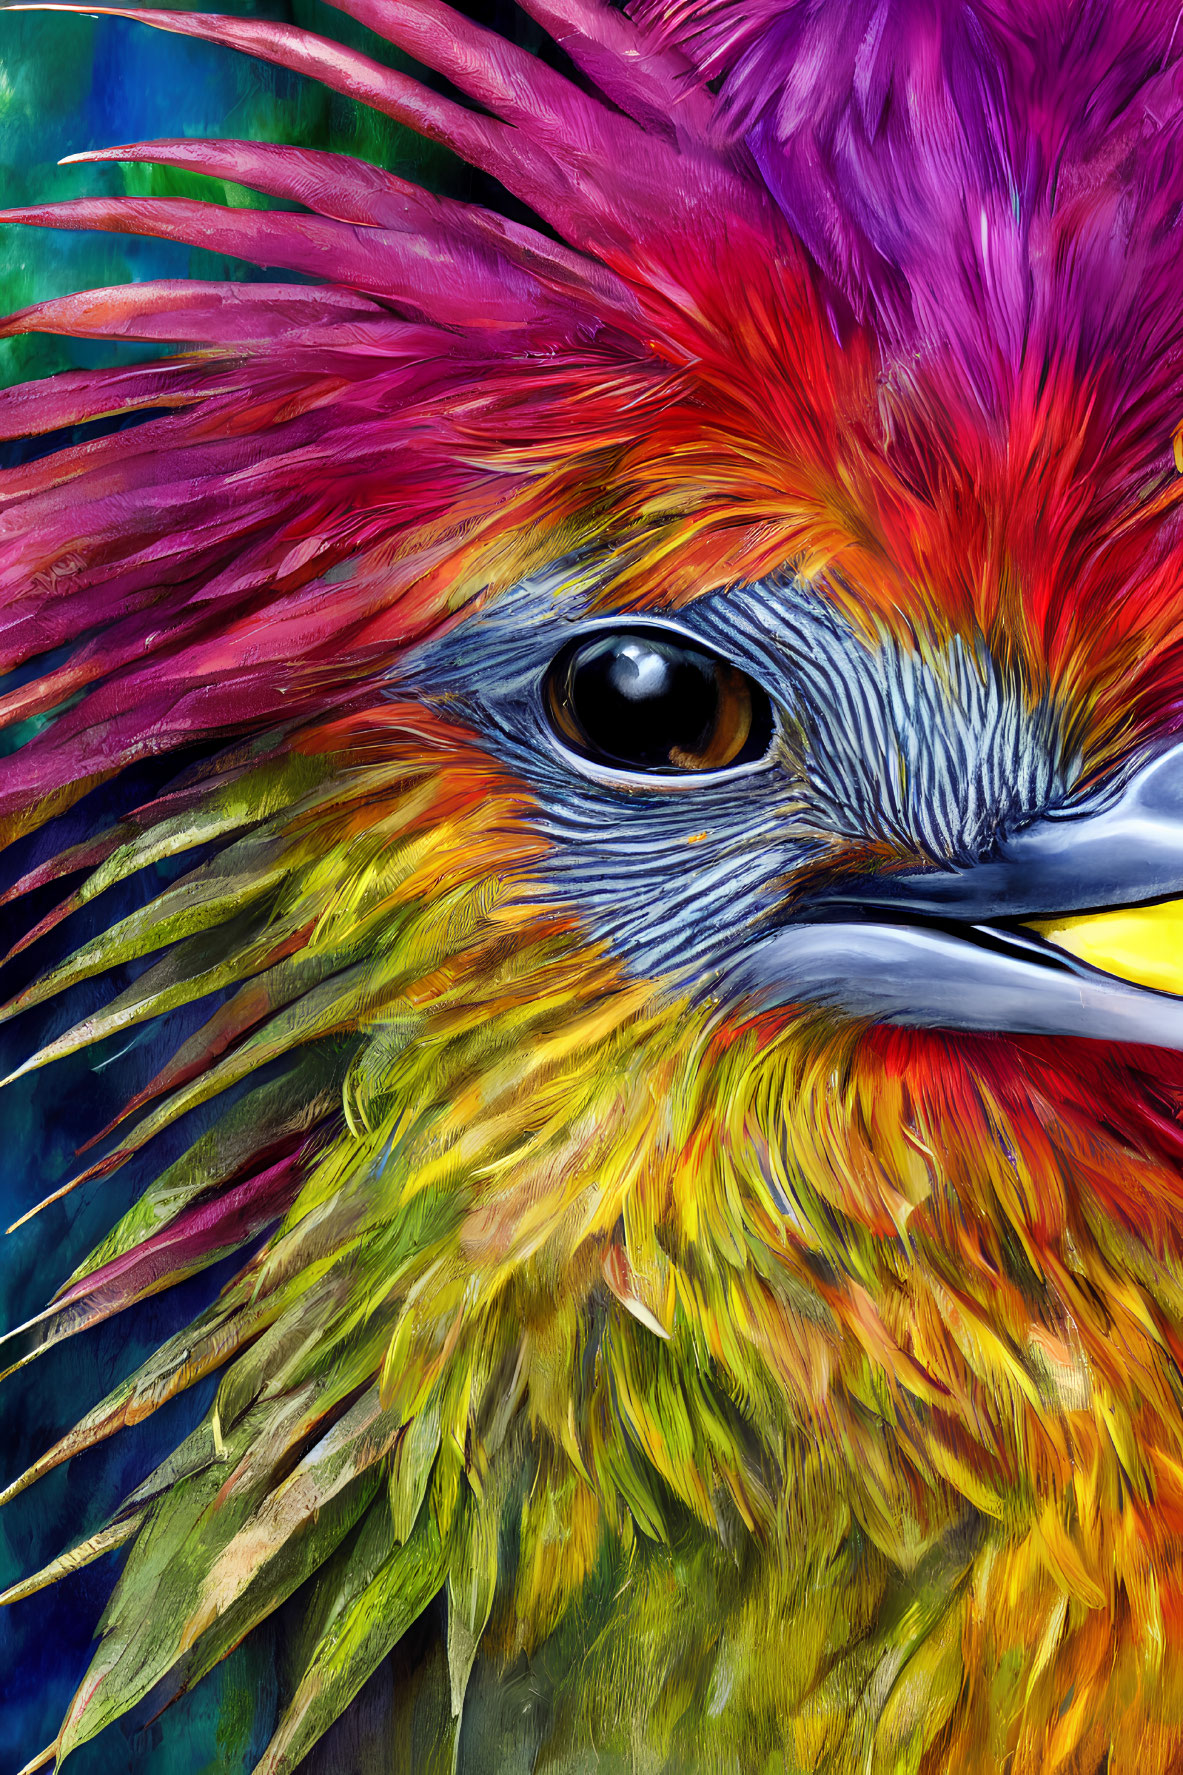 Colorful bird artwork with vibrant feathers in purple, pink, red, yellow, and blue.